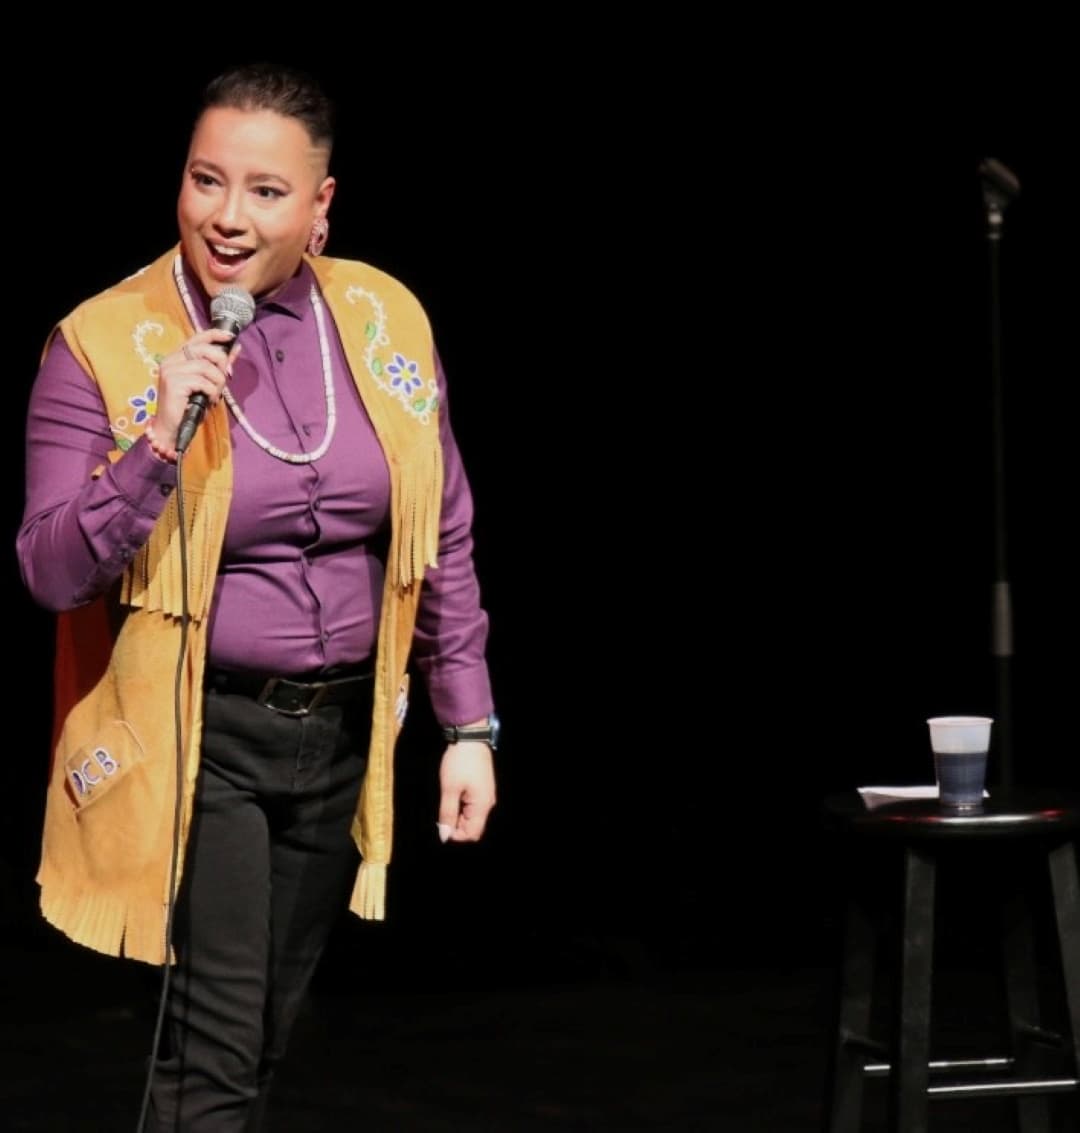 The laughs didn't stop Thursday night with comedian and producer Janelle Niles warming up the stage at the Algonquin Commons Theatre for the Got Land? Comedy show.